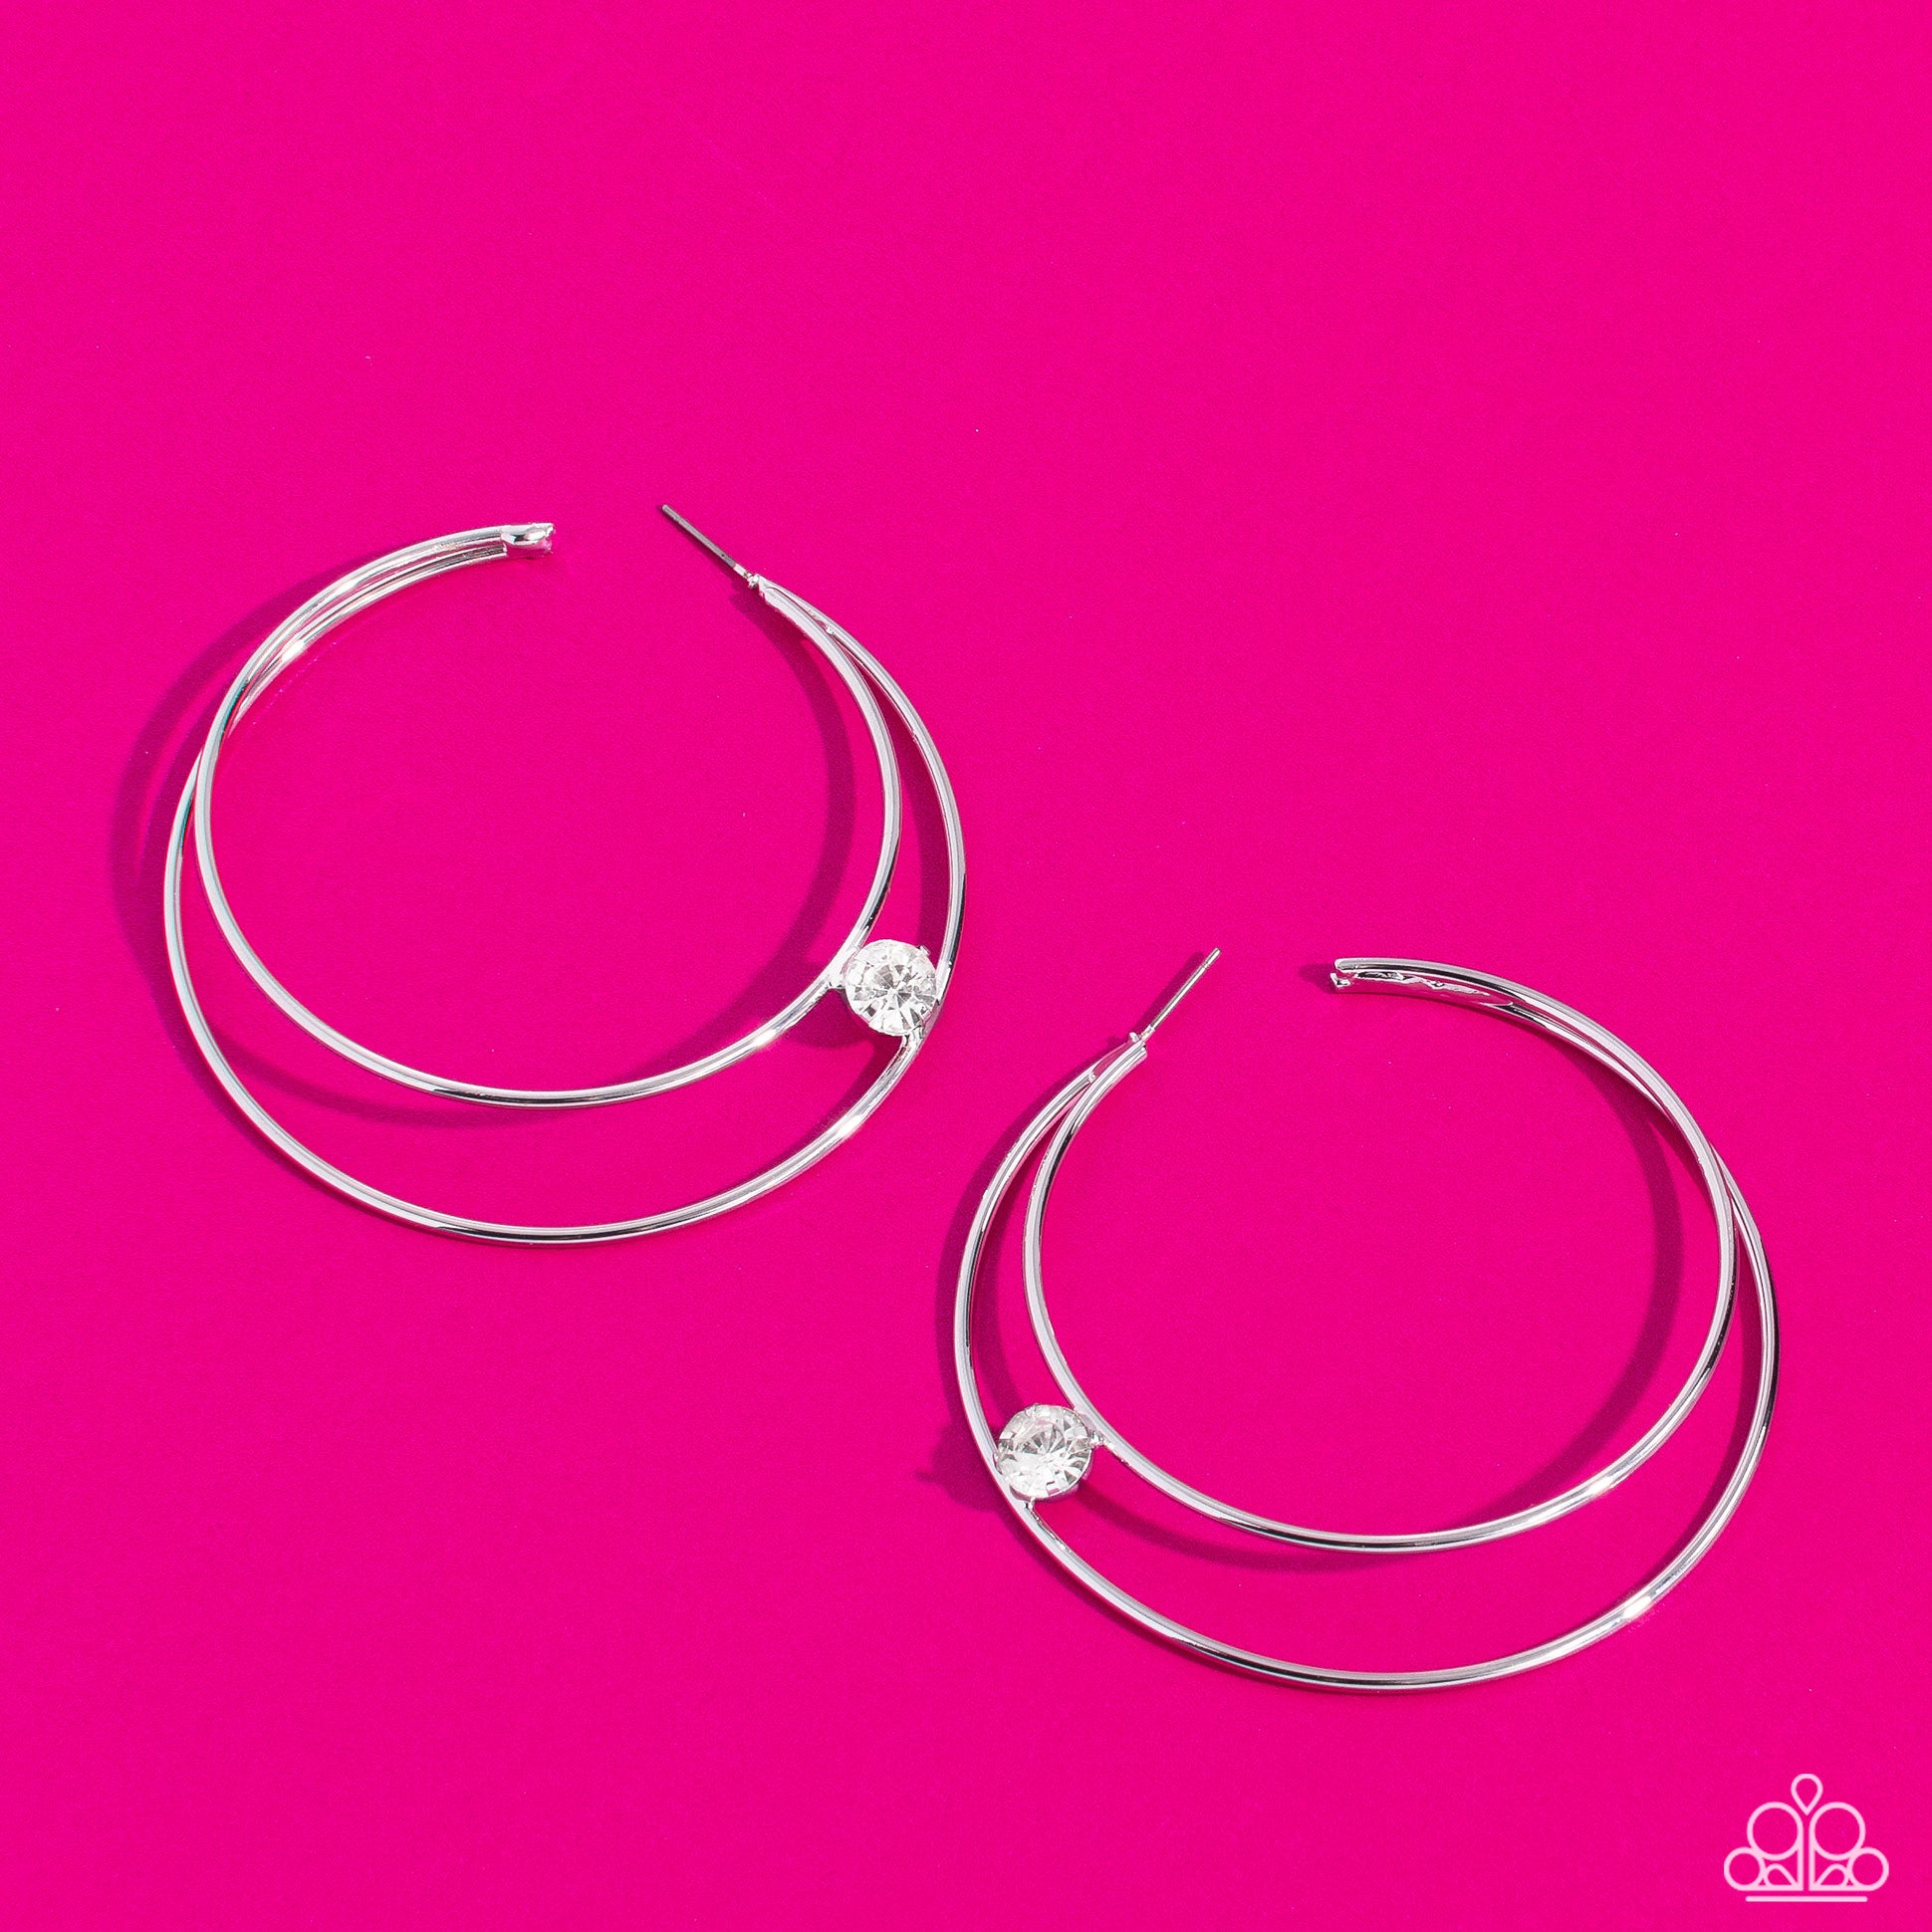 Paparazzi Accessories - Theater HOOP - White Earrings